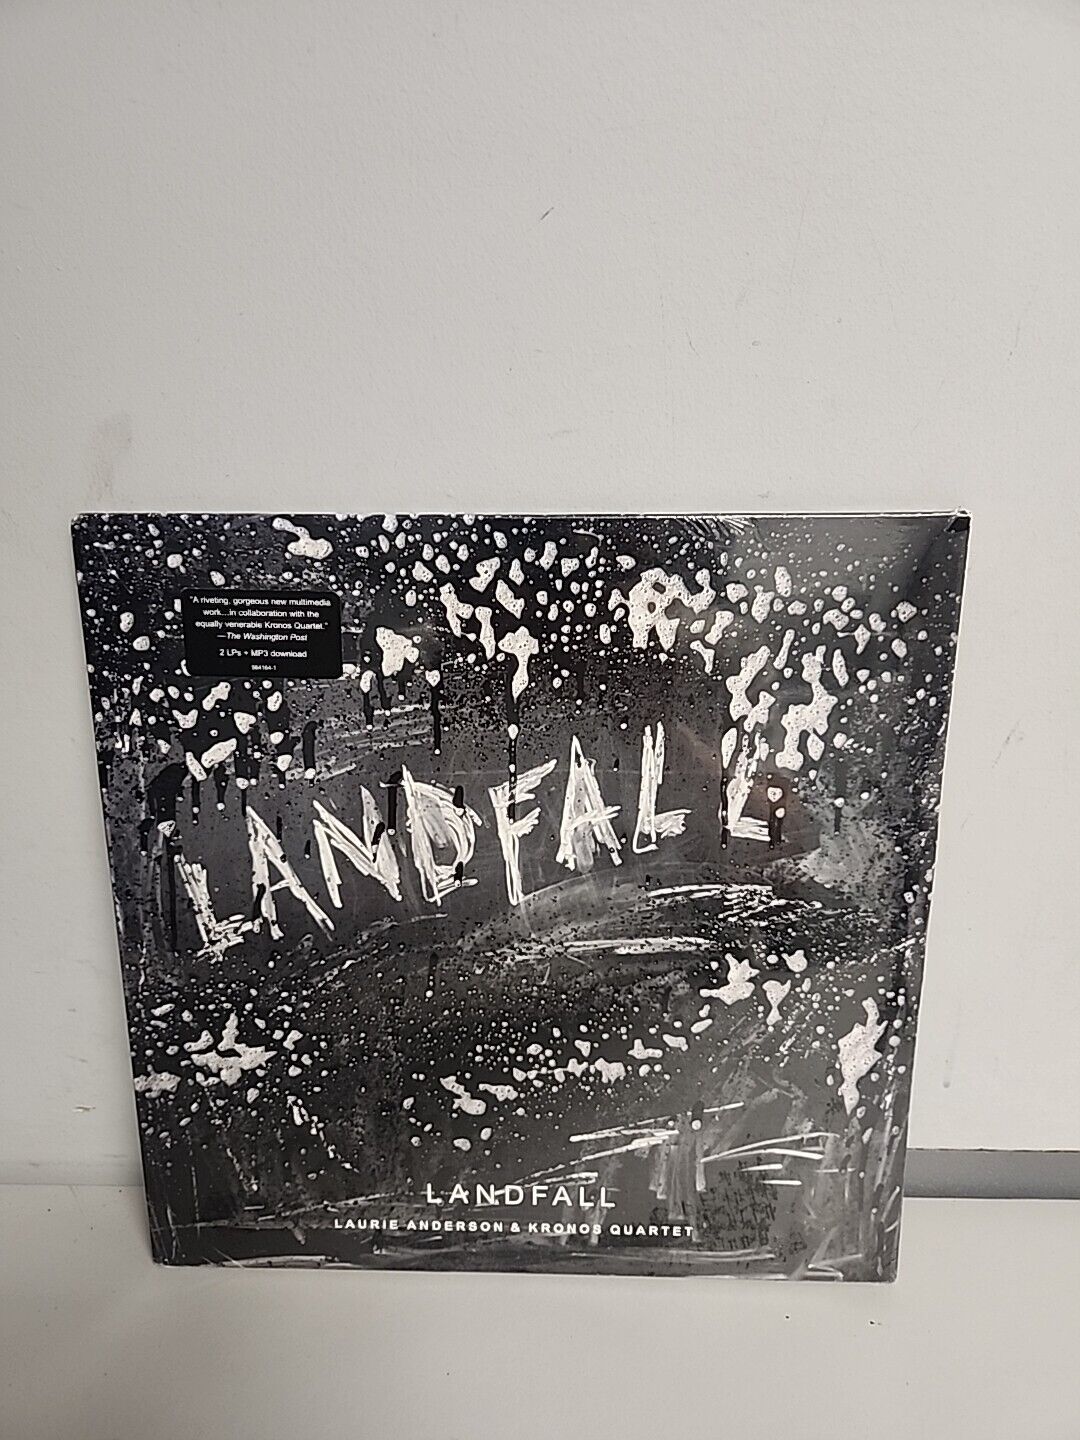 Laurie Anderson - Landfall [2xVinyl LP] 